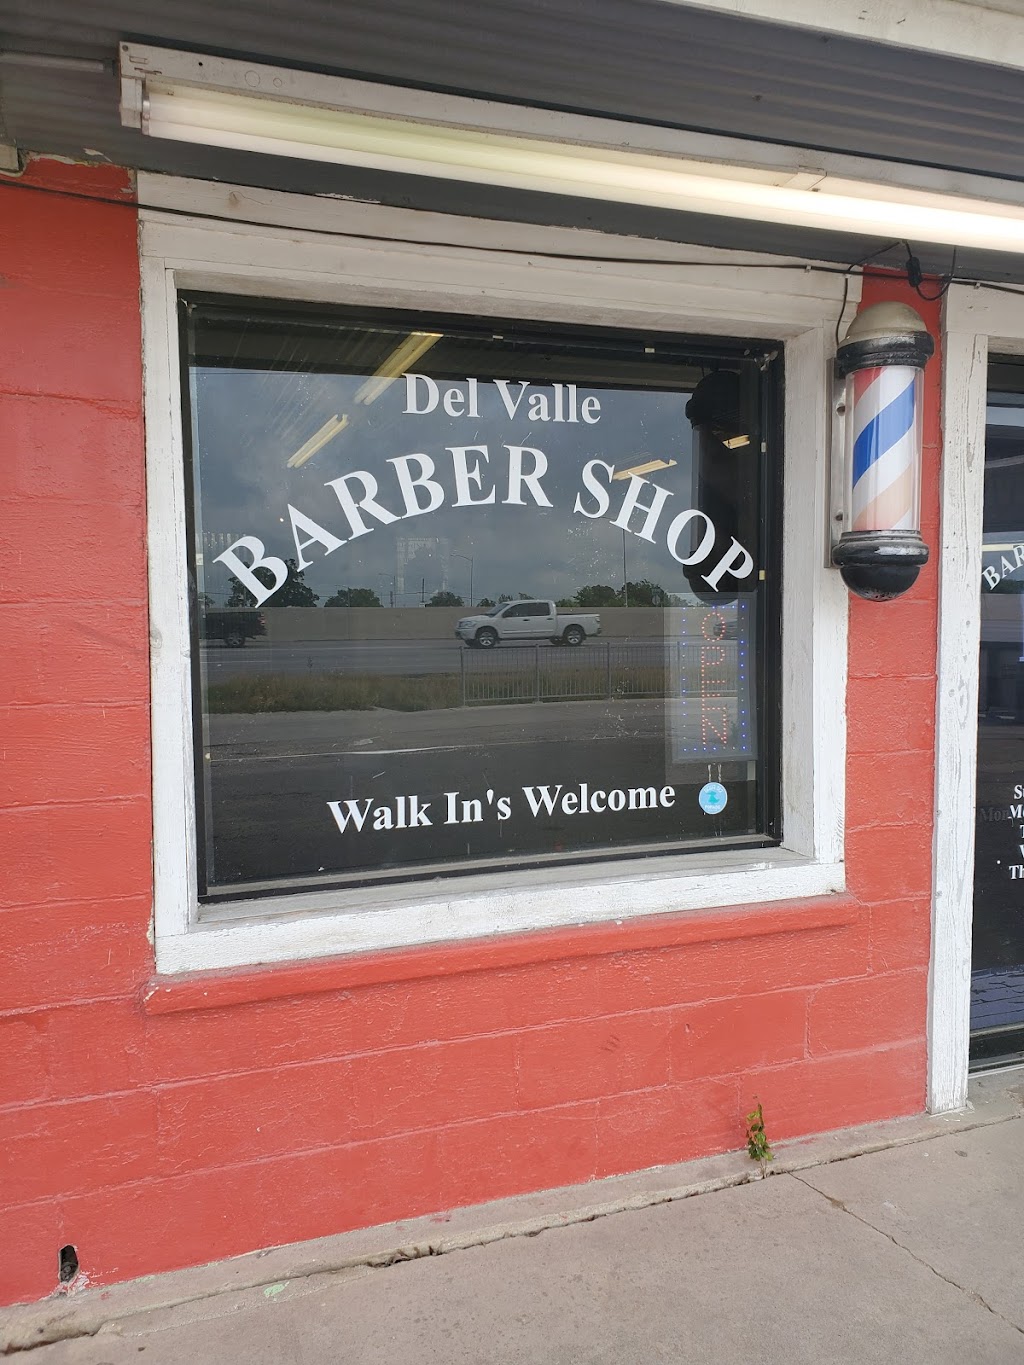 Del Valle Barber Shop - hair care  | Photo 1 of 1 | Address: 2769 E Hwy 71, Del Valle, TX 78617, USA | Phone: (512) 629-8632